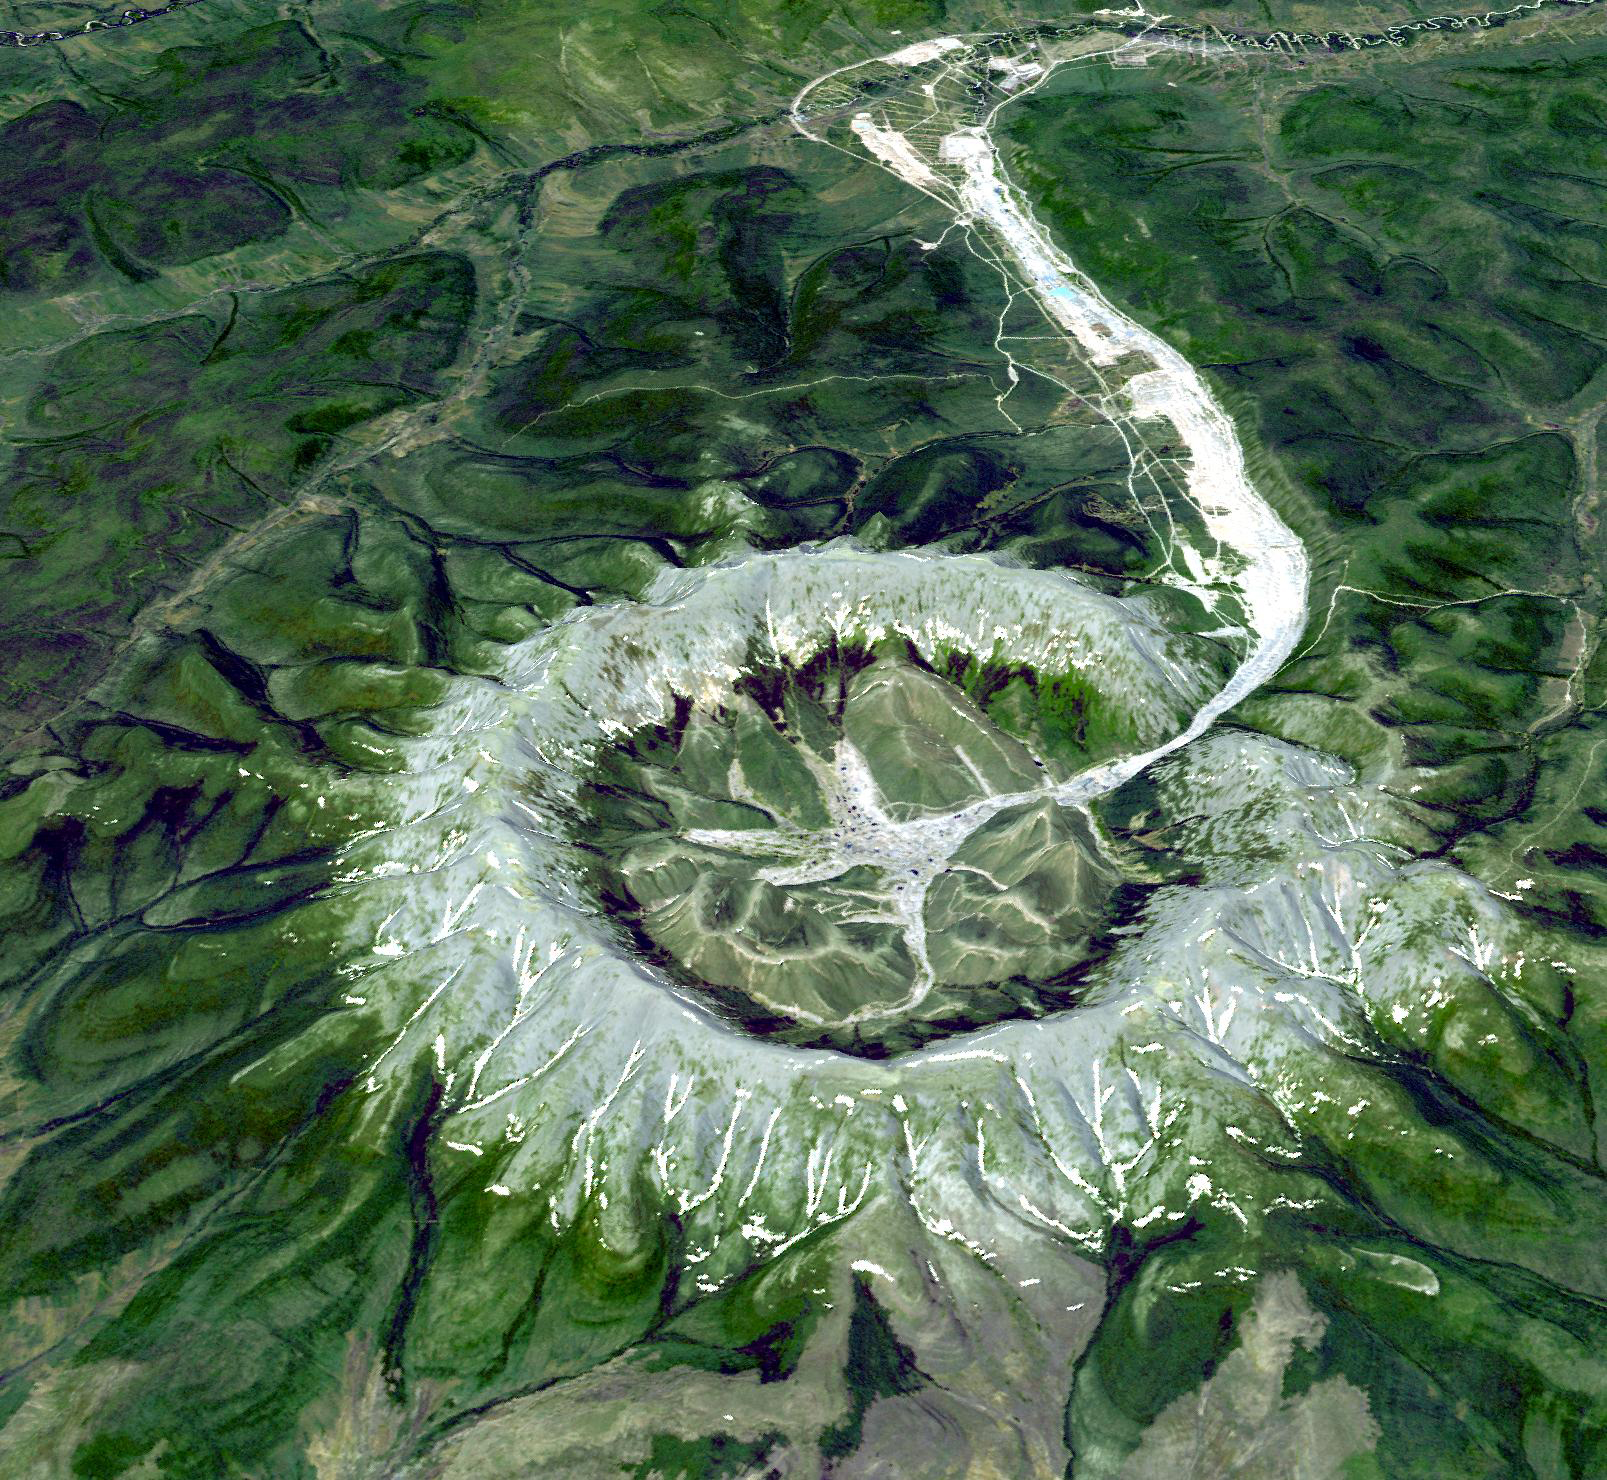 The Kondyor Massif in Eastern Siberia, Russia, is a rare form of igneous intrusion called alkaline-ultrabasic massif and it is full of rare minerals. The river flowing out of it forms placer mineral deposits. The image was acquired on June 10, 2006.